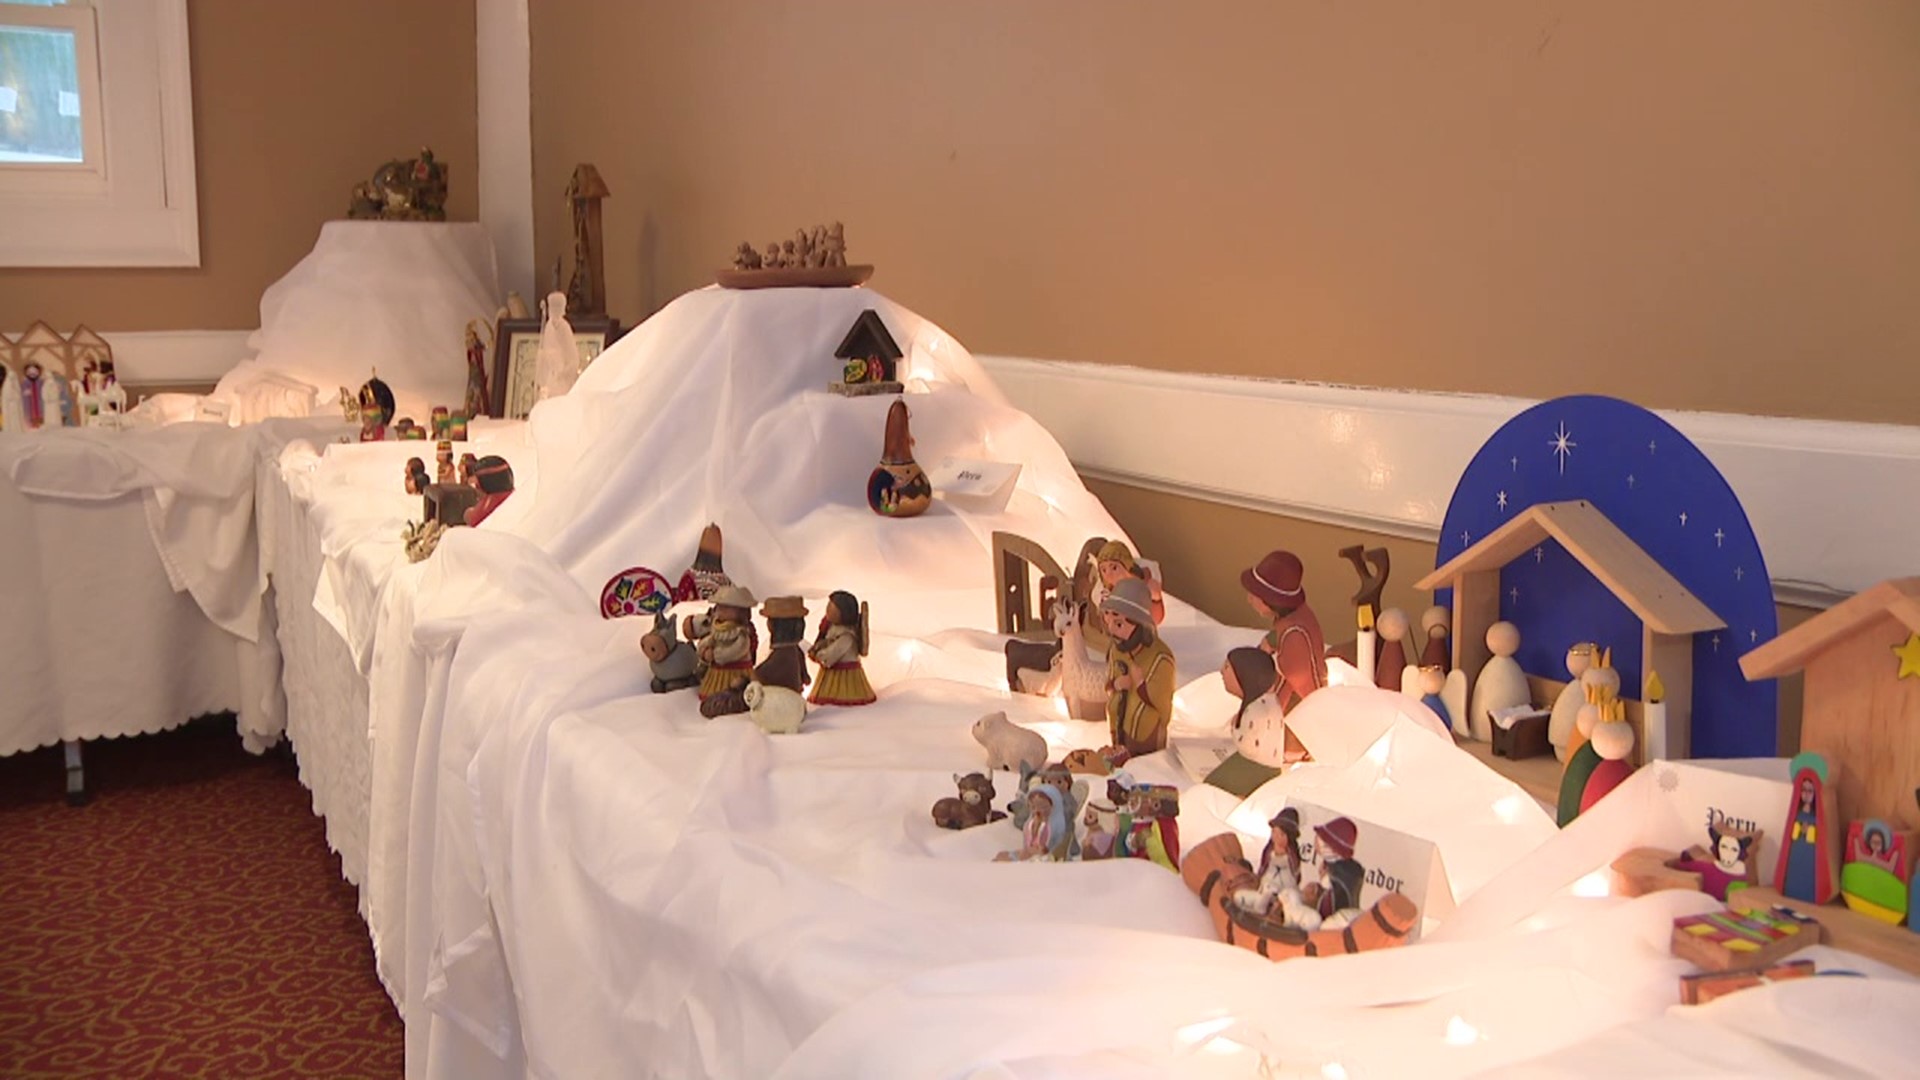 More than 100 nativities from around the world are being shown off at Shawnee Inn and Golf Resort near Marshalls Creek.